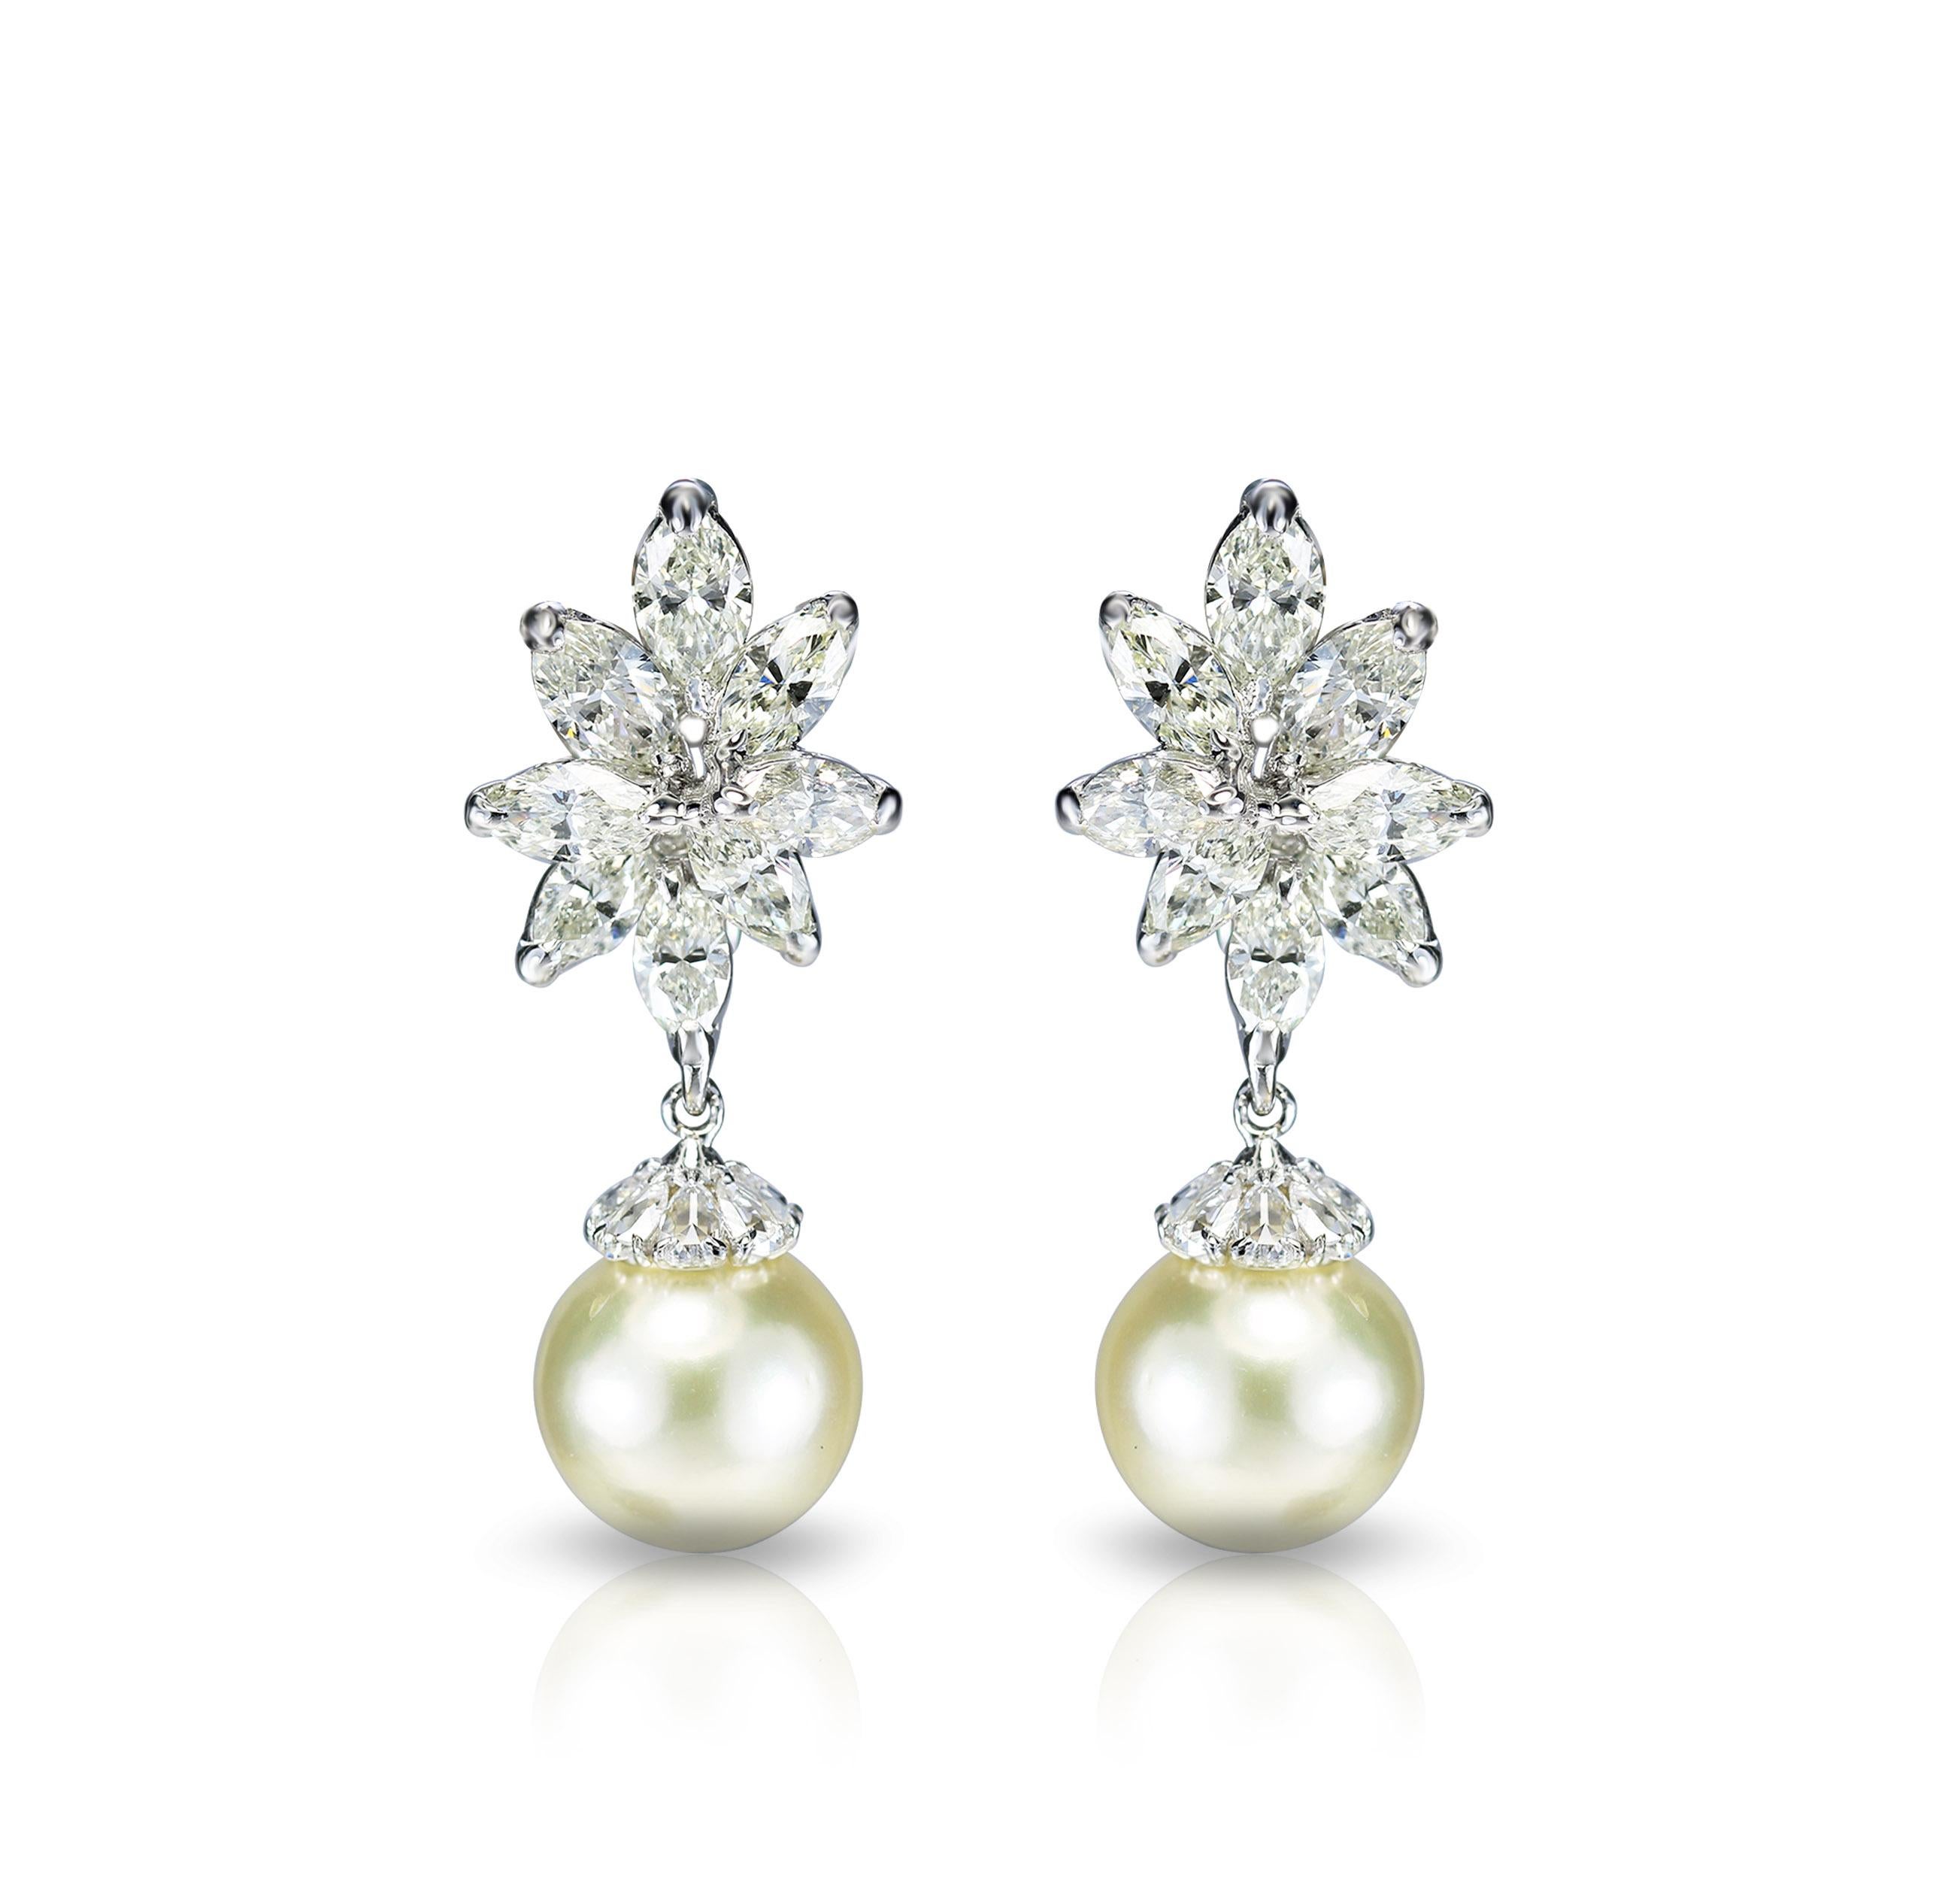 Diamond and south sea pearl earrings

Delicate flowers with calming pearl drops make up this beautiful pair of 18K white gold earrings that are carefully studded with brilliant cut marquise, pear rose cut diamonds and south sea pearls in a prong